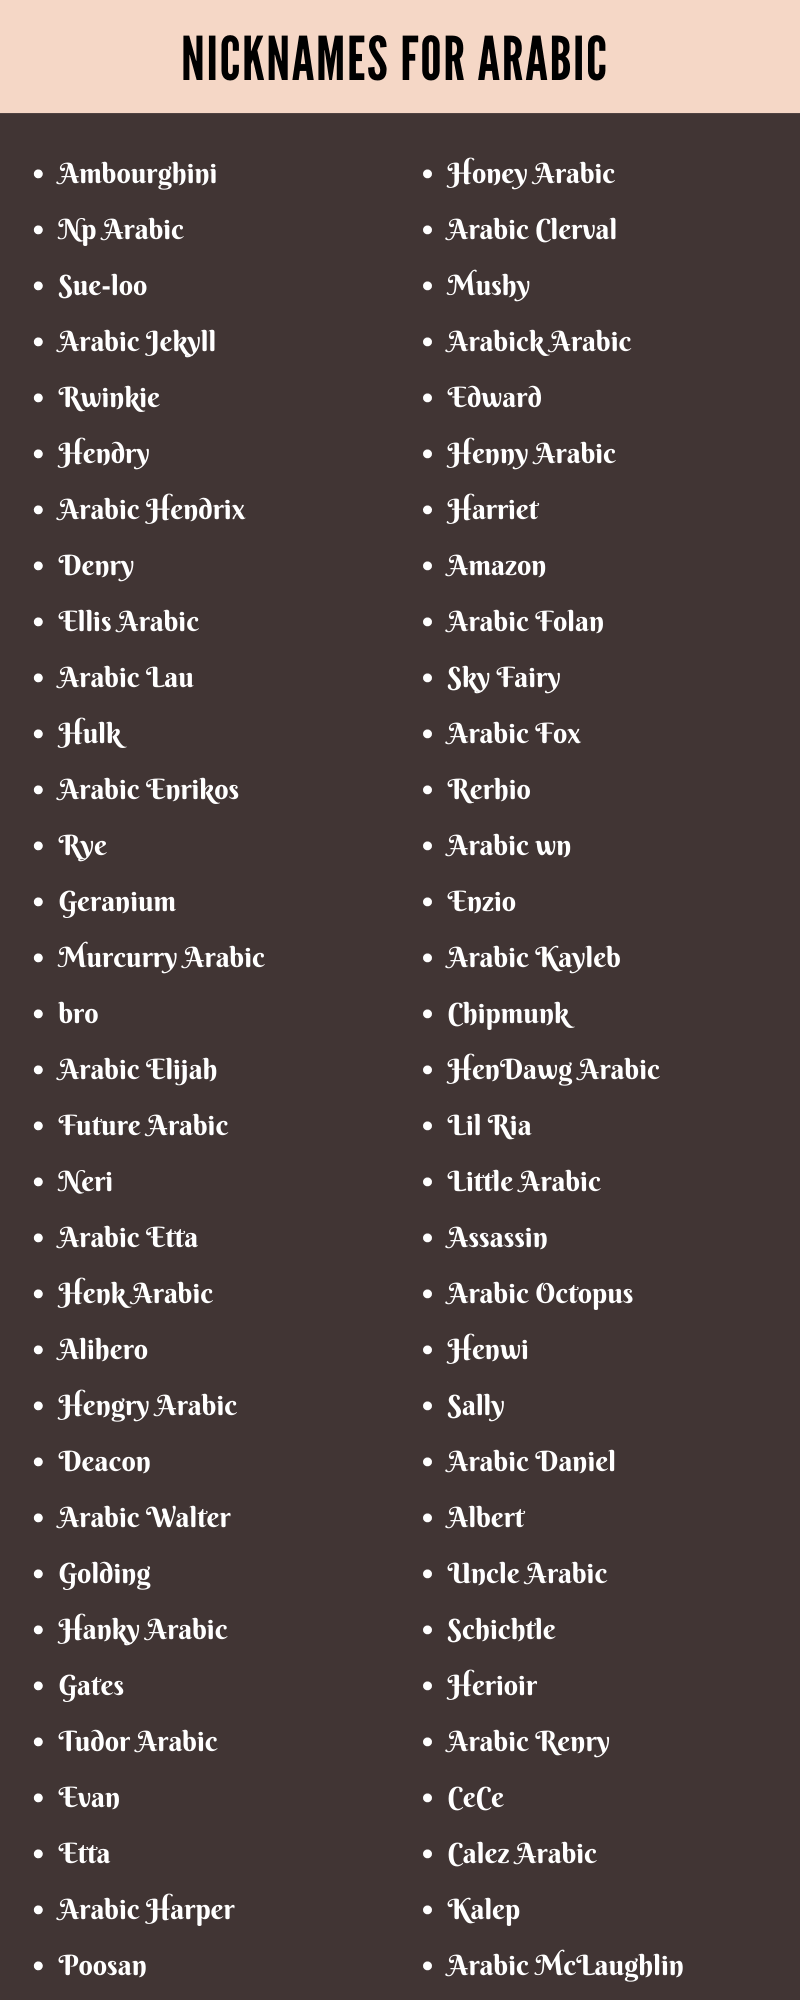 Arabic Nicknames: 200+ Best and Amazing Names